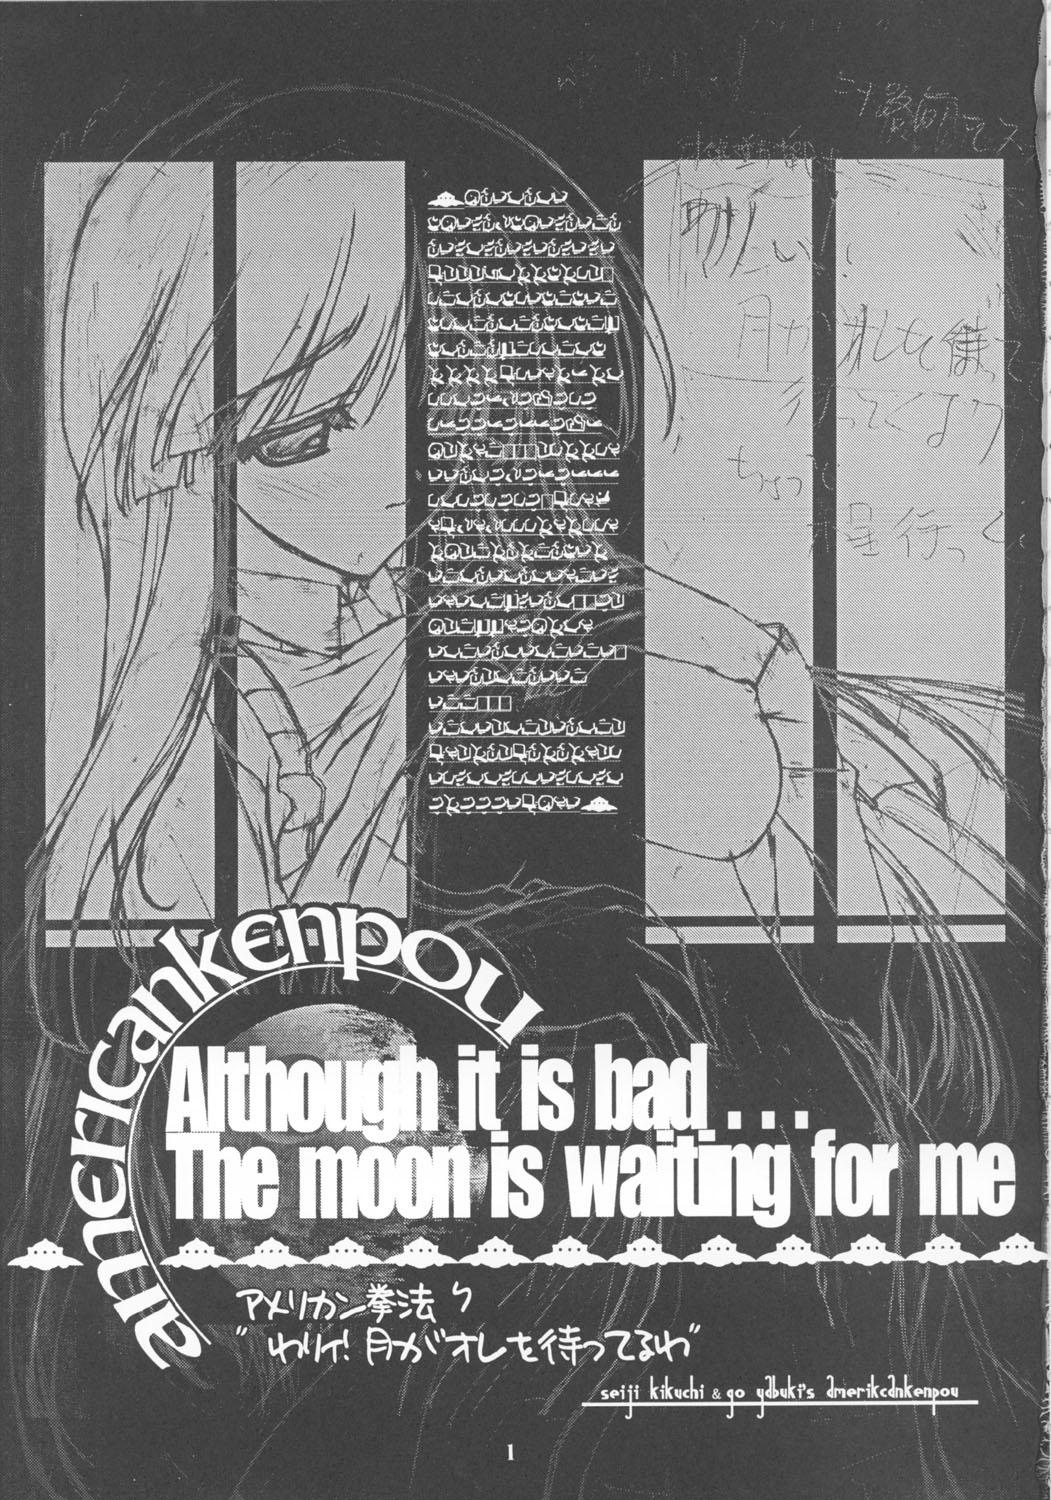 Bath Warii! Tsuki ga Ore wo Matteruwa ～Although it is bad...The moon is waiting for me～ - Final fantasy x-2 Gad guard Gay Party - Page 2